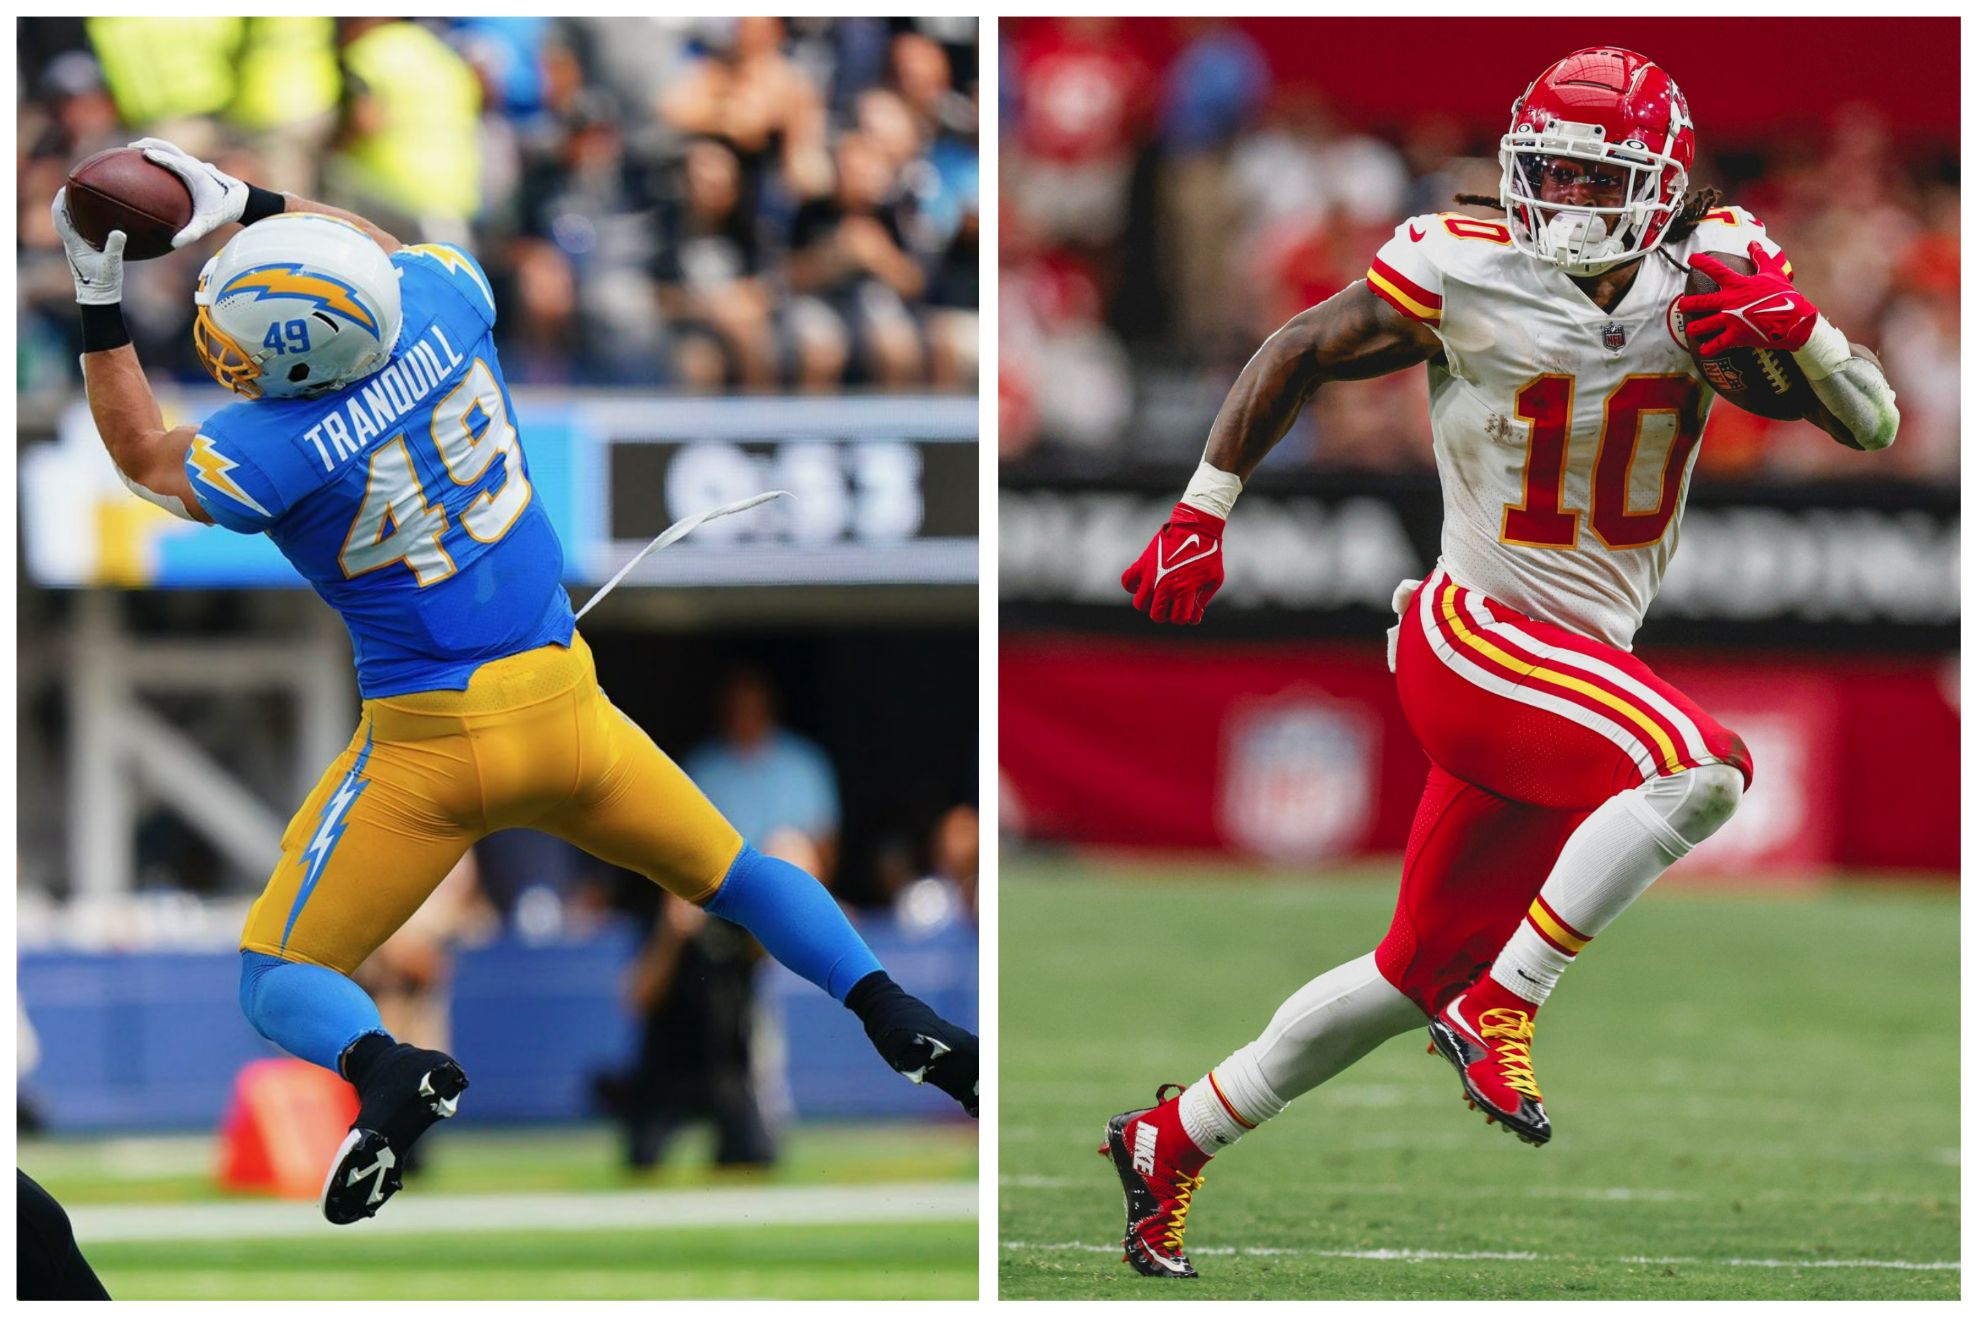 LA Chargers will face the KC Chiefs on Thursday Night Football - Twitter: @DTranquill / @Chiefs